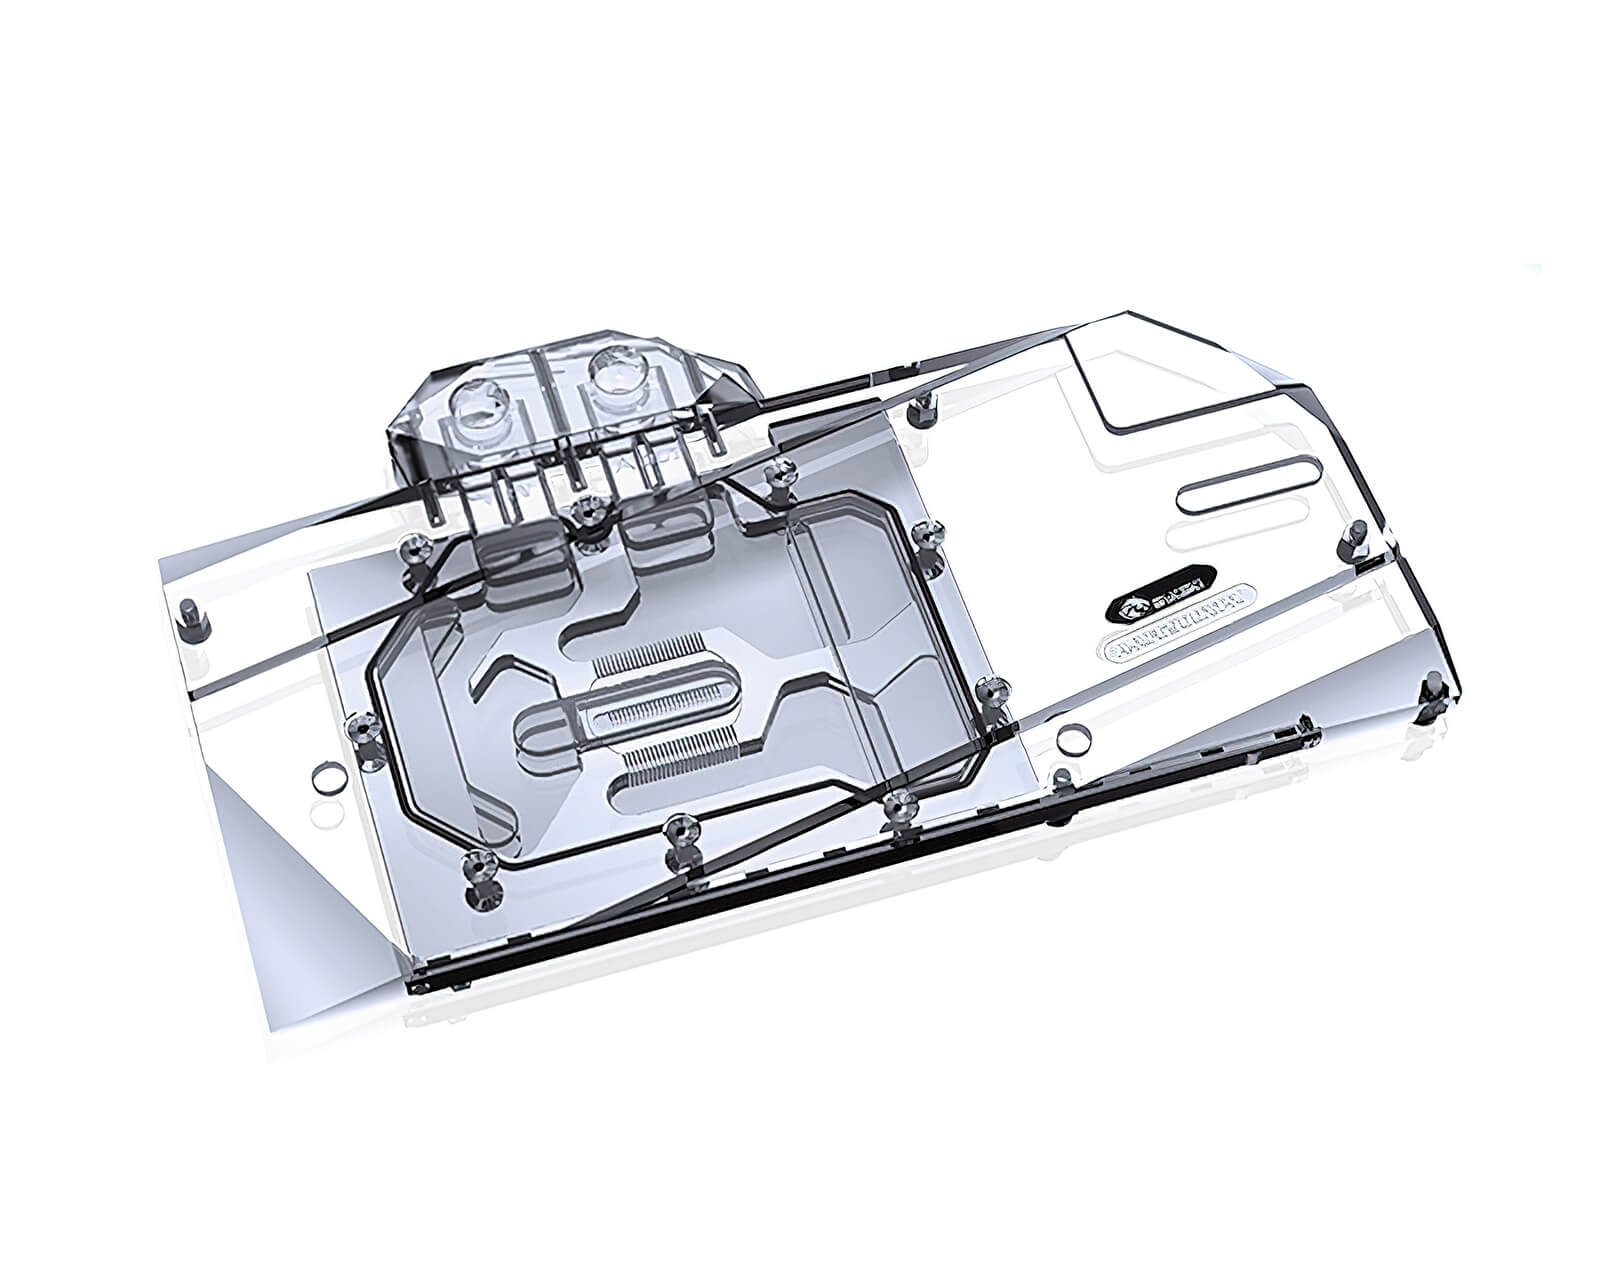 Bykski Full Coverage GPU Water Block and Backplate for XFX RX 6800/6900 XT Overseas Edition (A-XF6900XT-X) - PrimoChill - KEEPING IT COOL